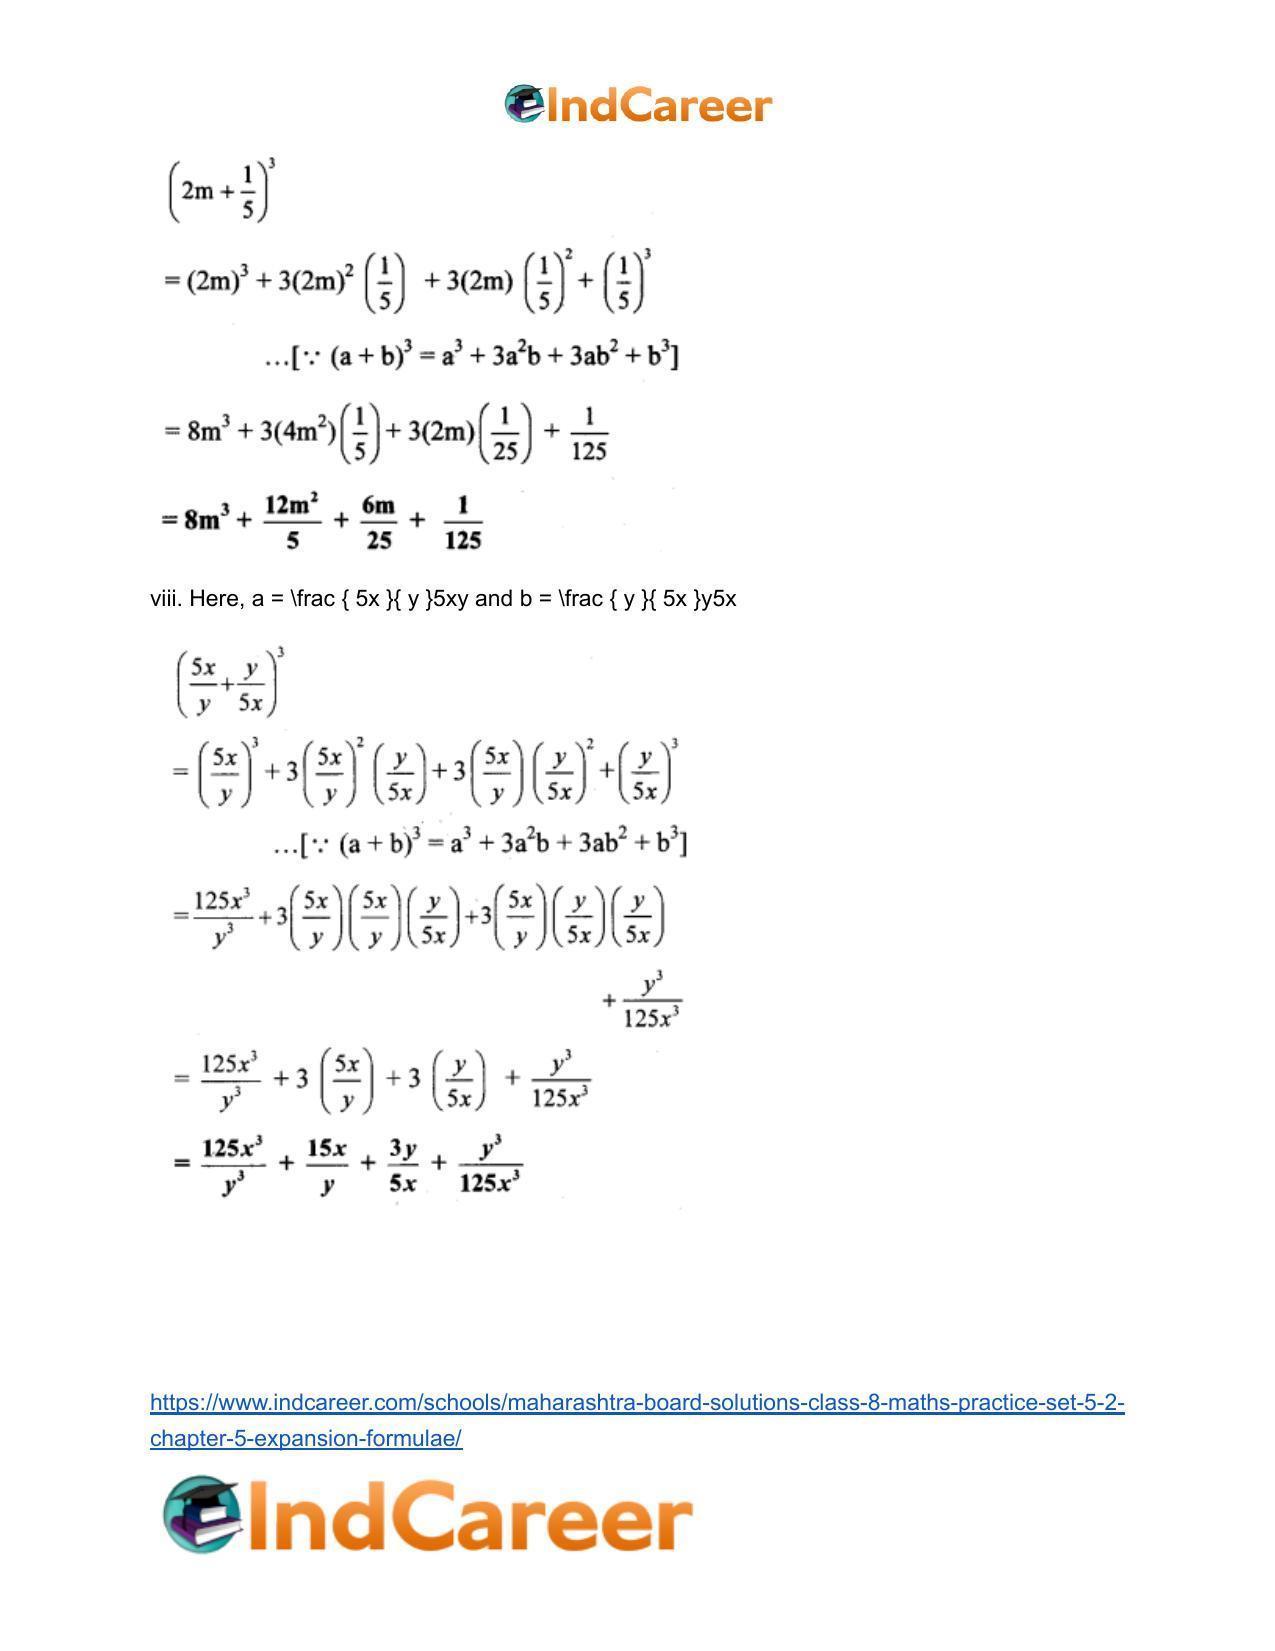 Maharashtra Board Solutions Class 8-Maths (Practice Set 5.2): Chapter 5- Expansion Formulae - Page 5